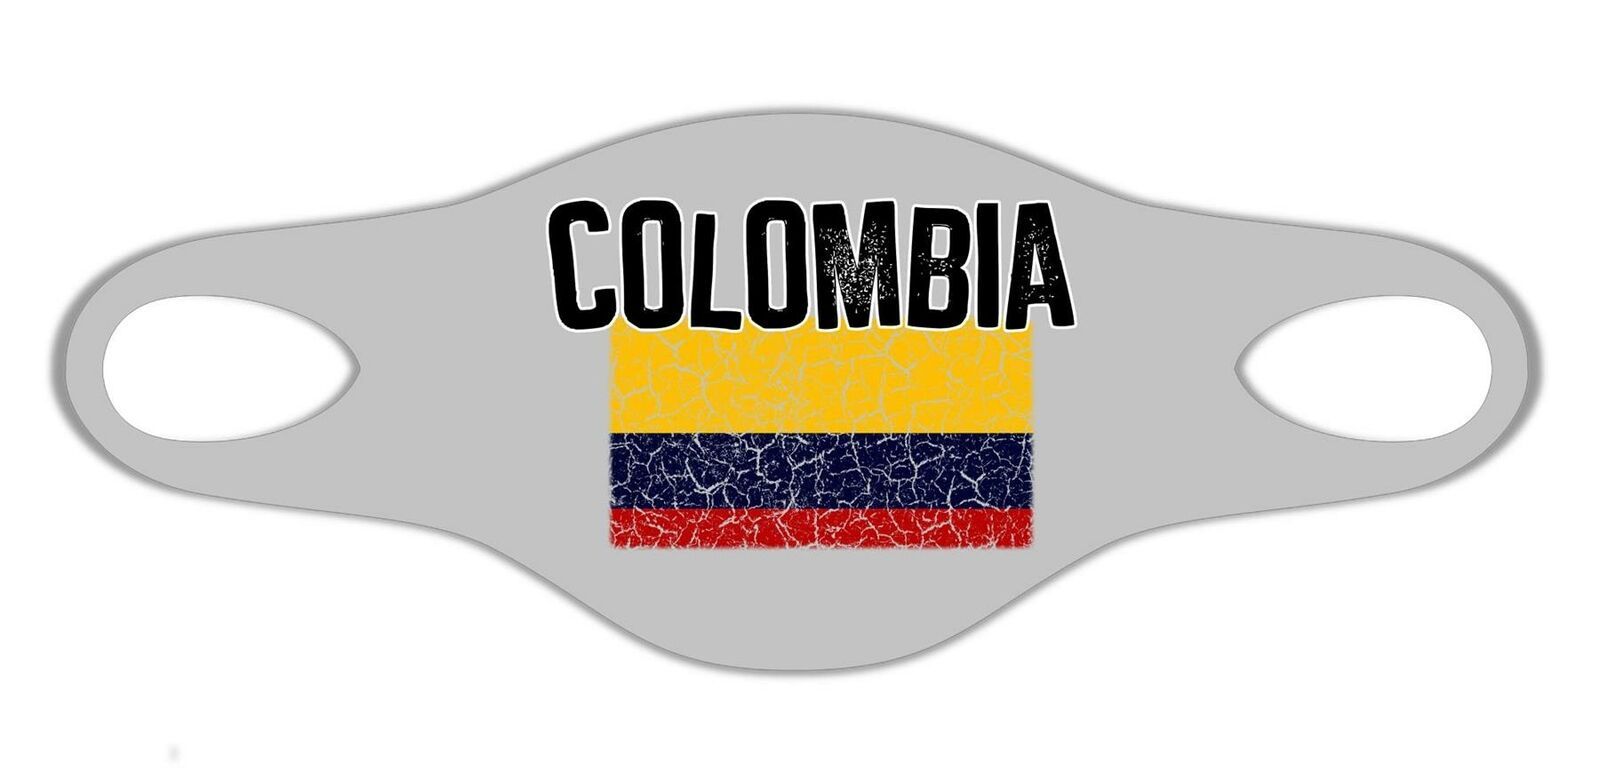 Colombia Patriot Flag Printed Face Mask Protective Reusable Washable Breathable